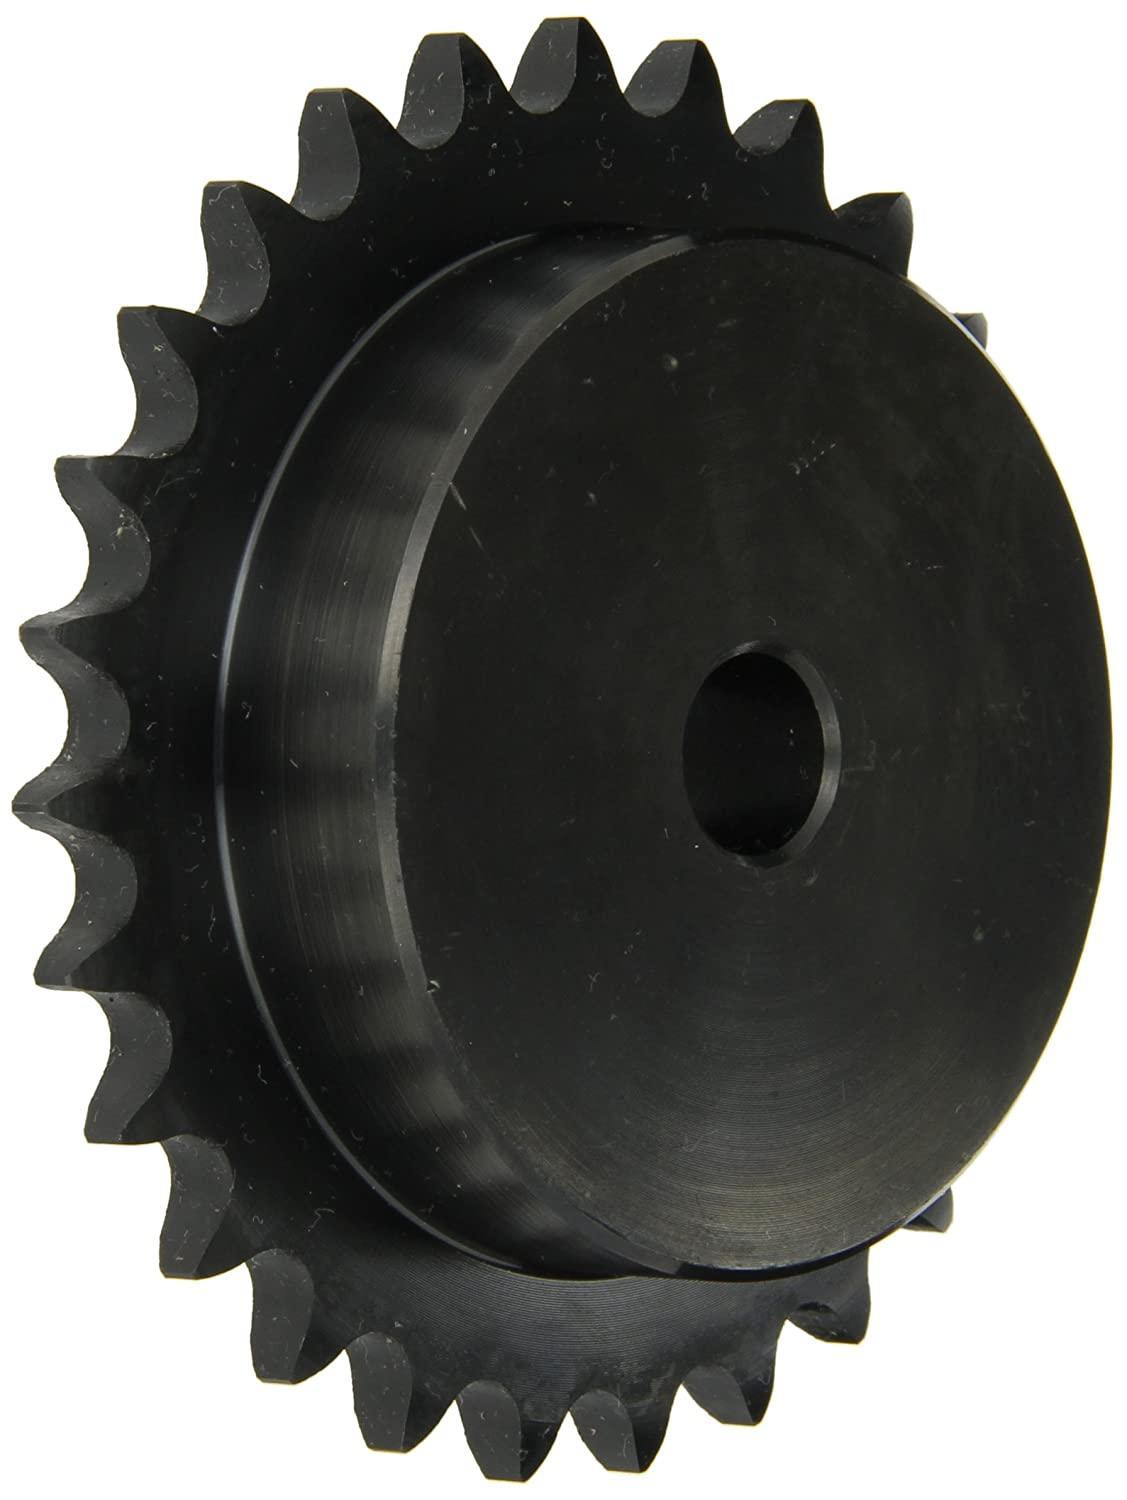 25B19 Roller Chain Sprocket With Stock Bore - Forces Inc